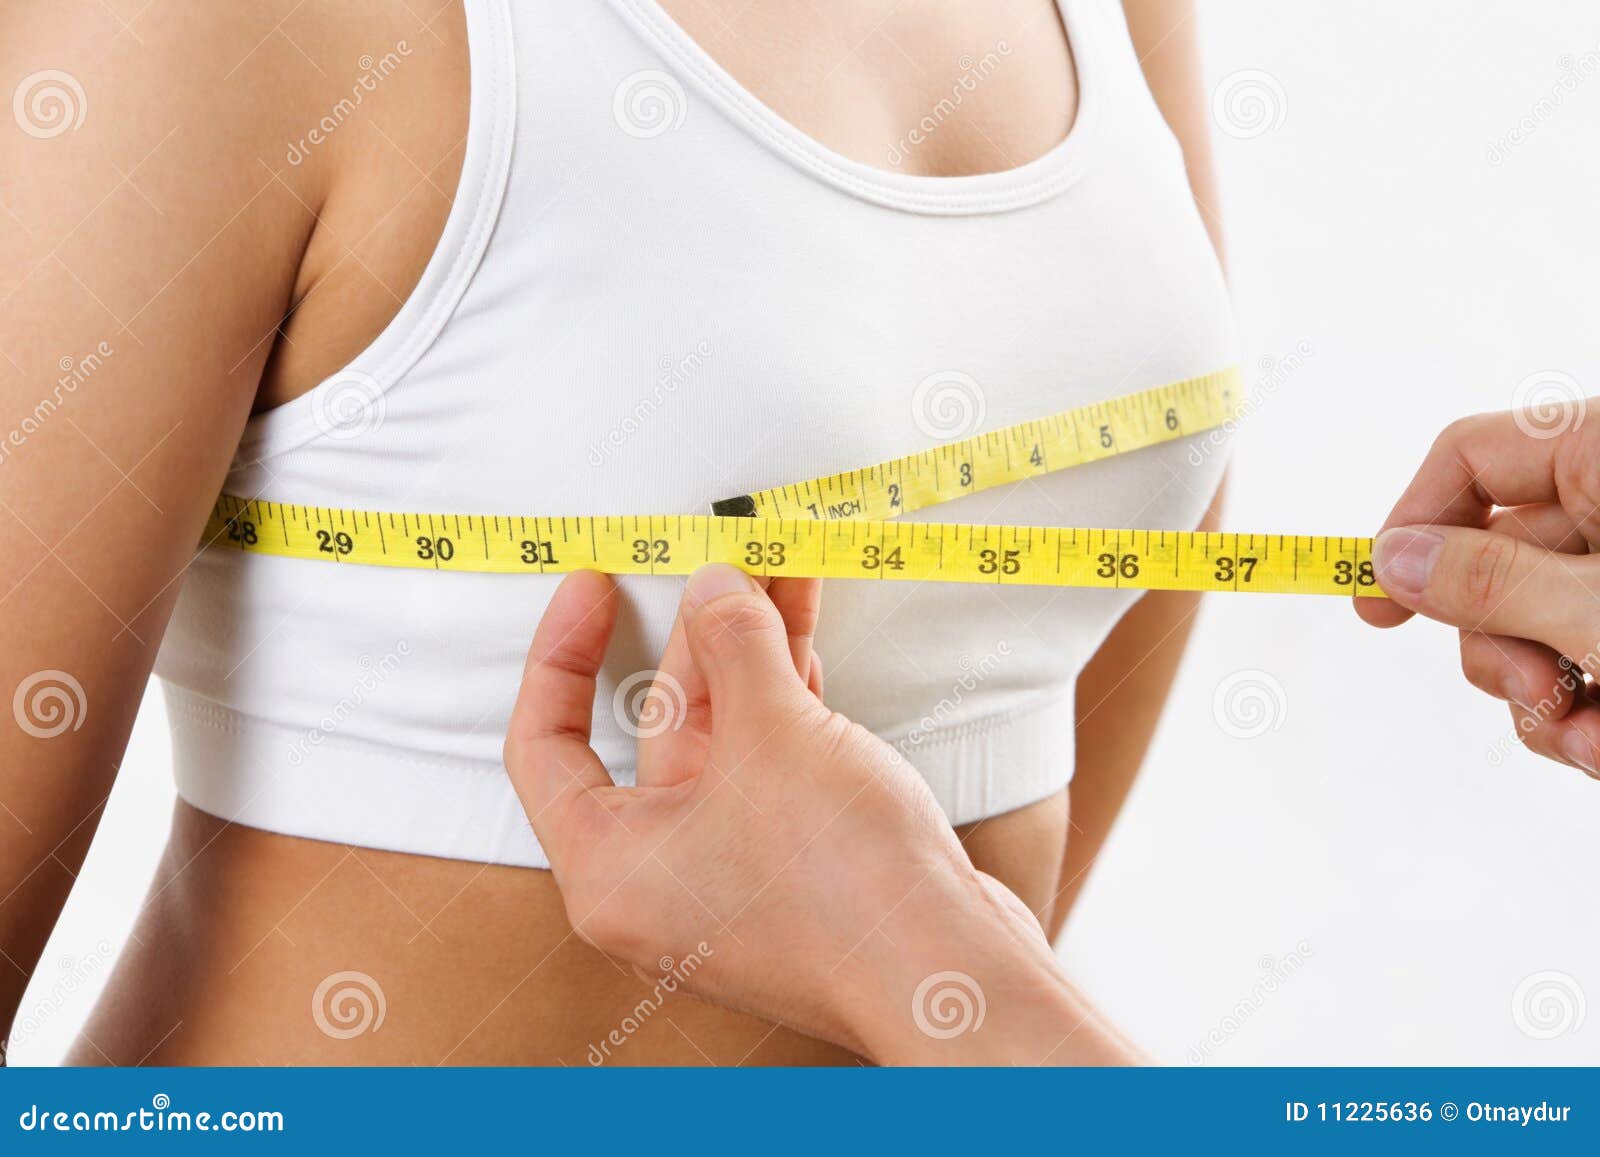 Measuring bra cup size stock photo. Image of adult, holding - 11225636